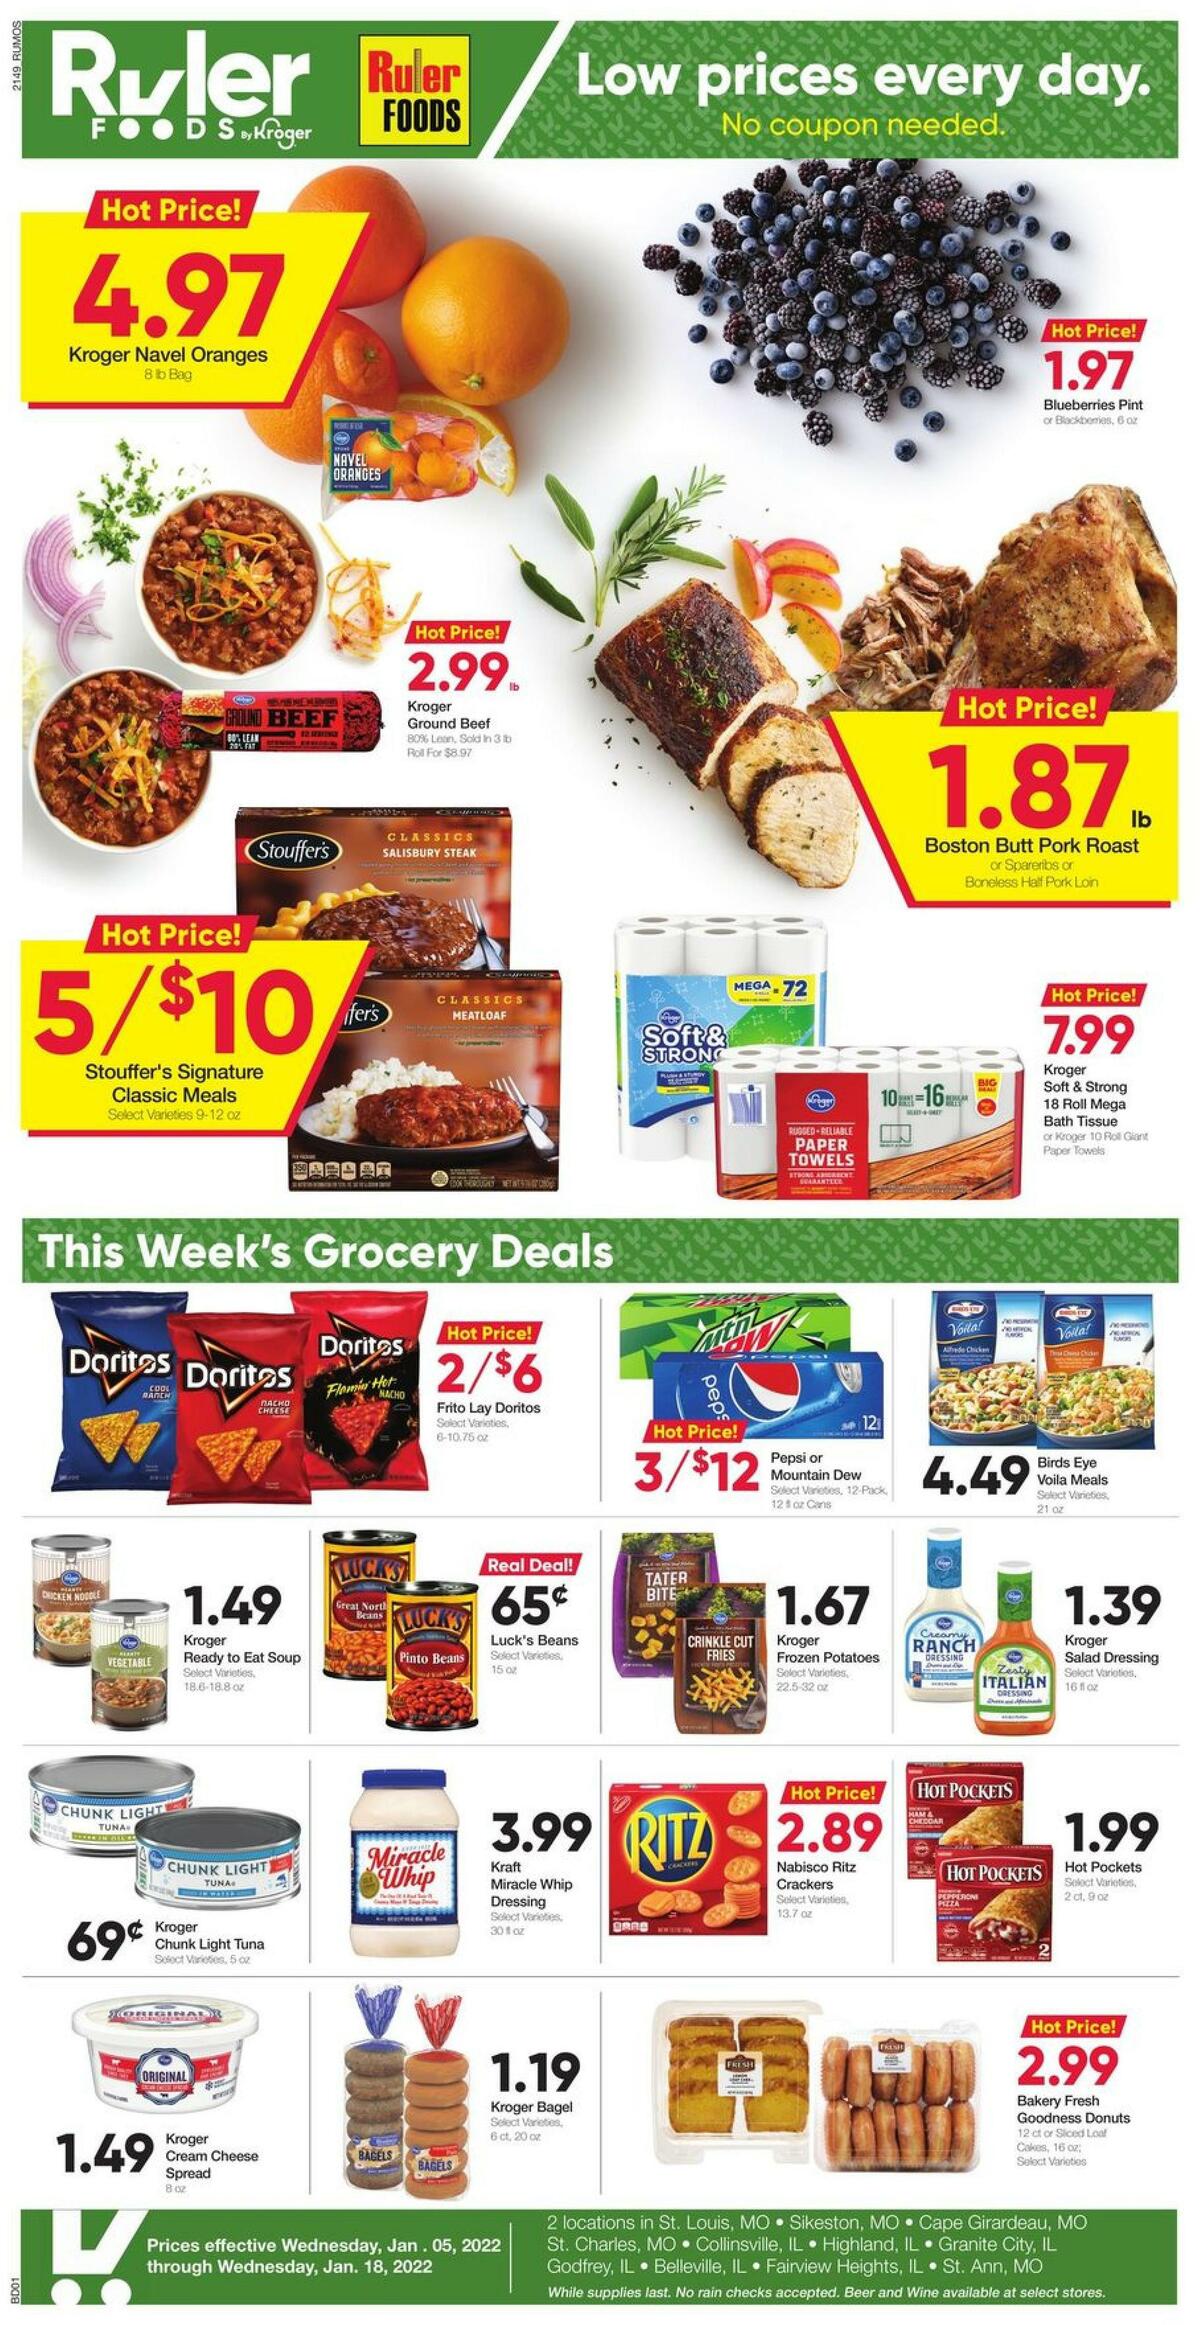 Ruler Foods Weekly Ad from January 5